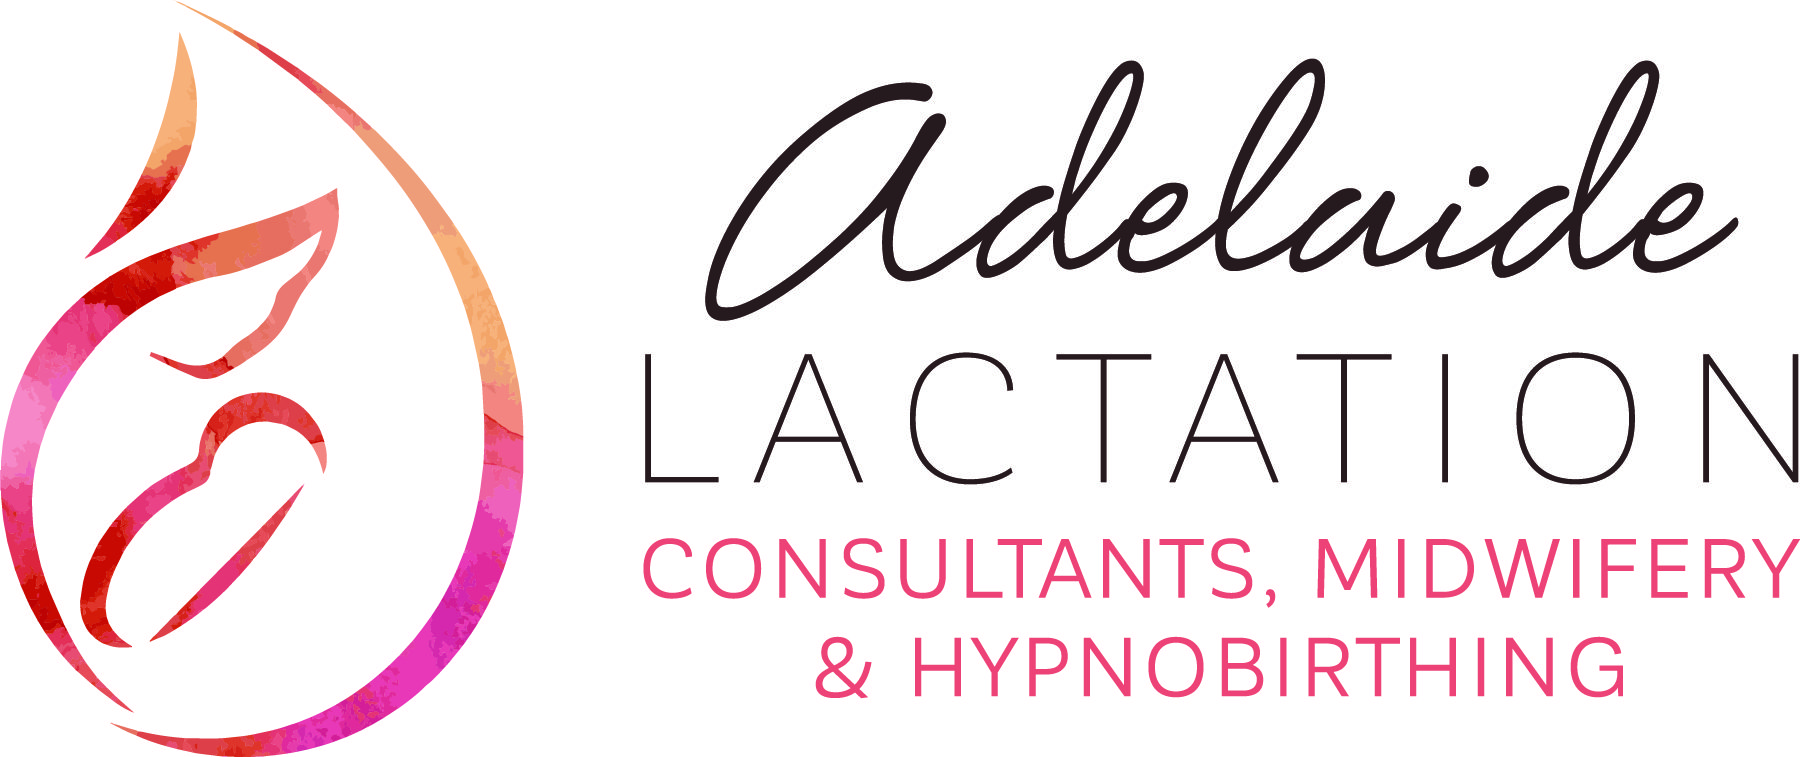 Adelaide Lactation Consultants, Midwifery & Hypnobirthing